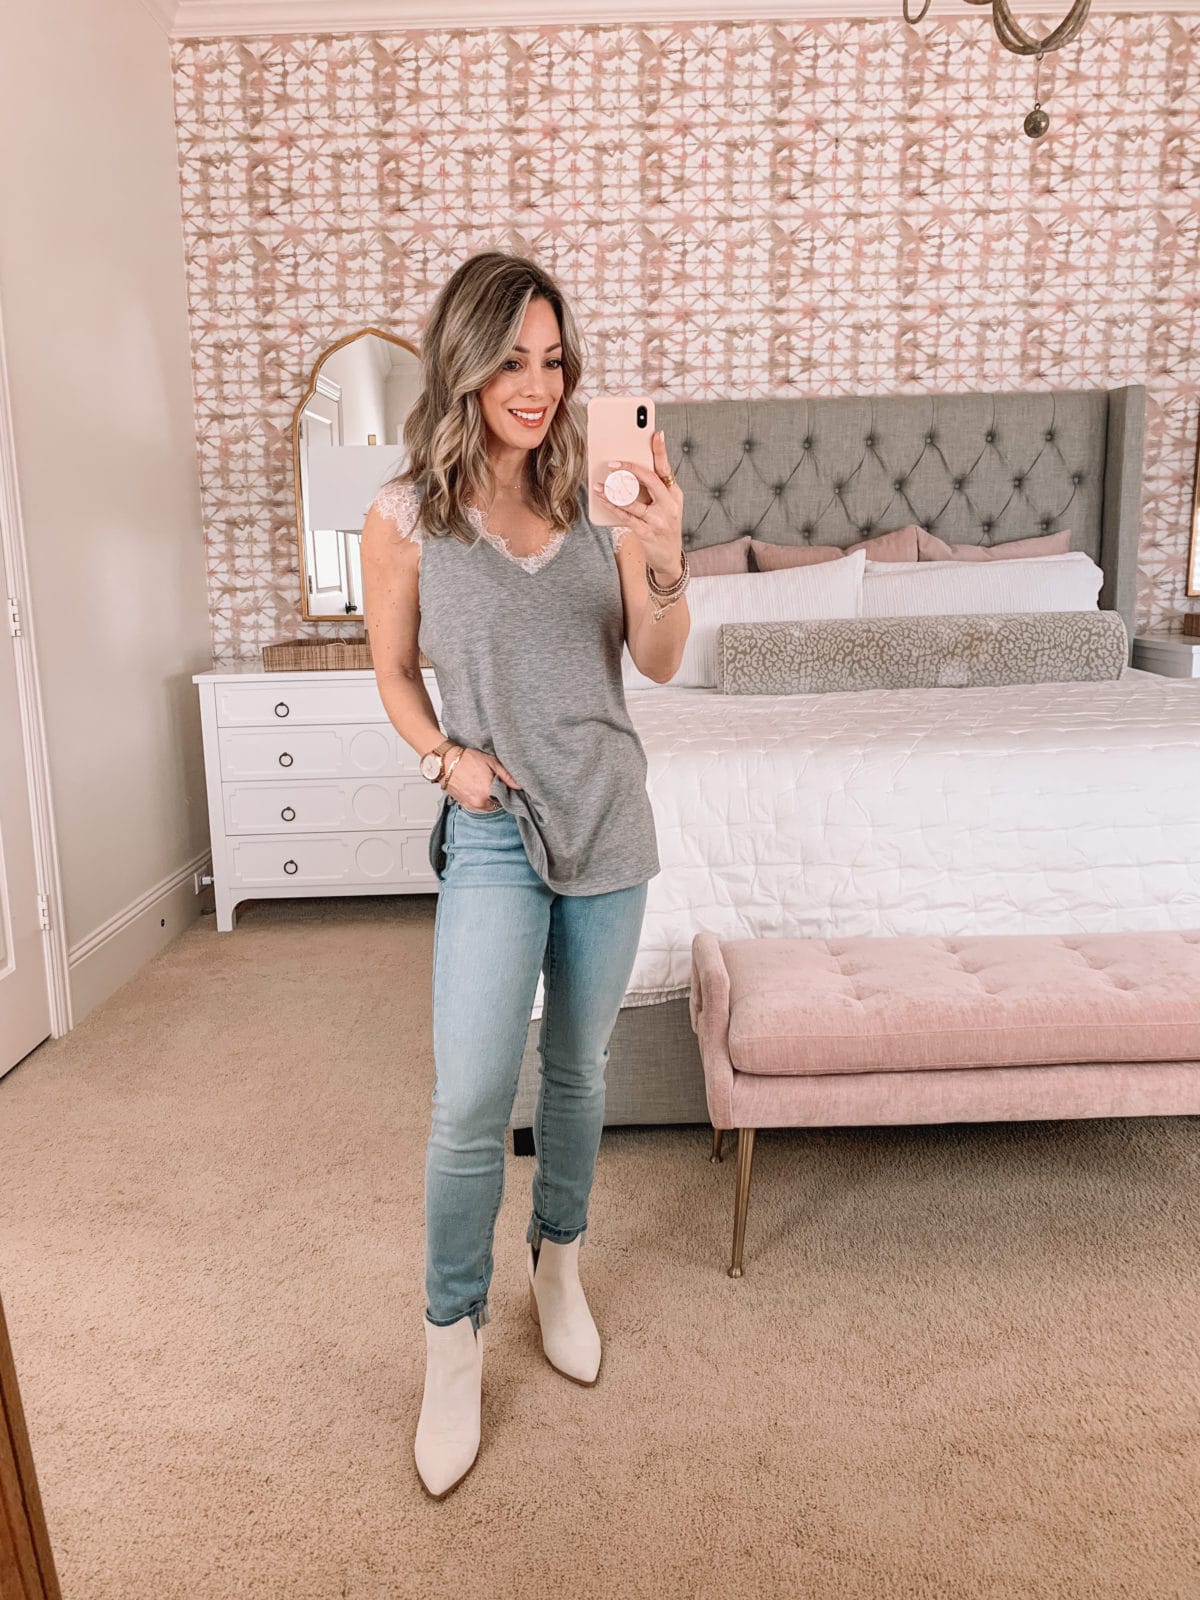 Amazon Fashion Faves, Tunic Tee, Jeans, Booties 